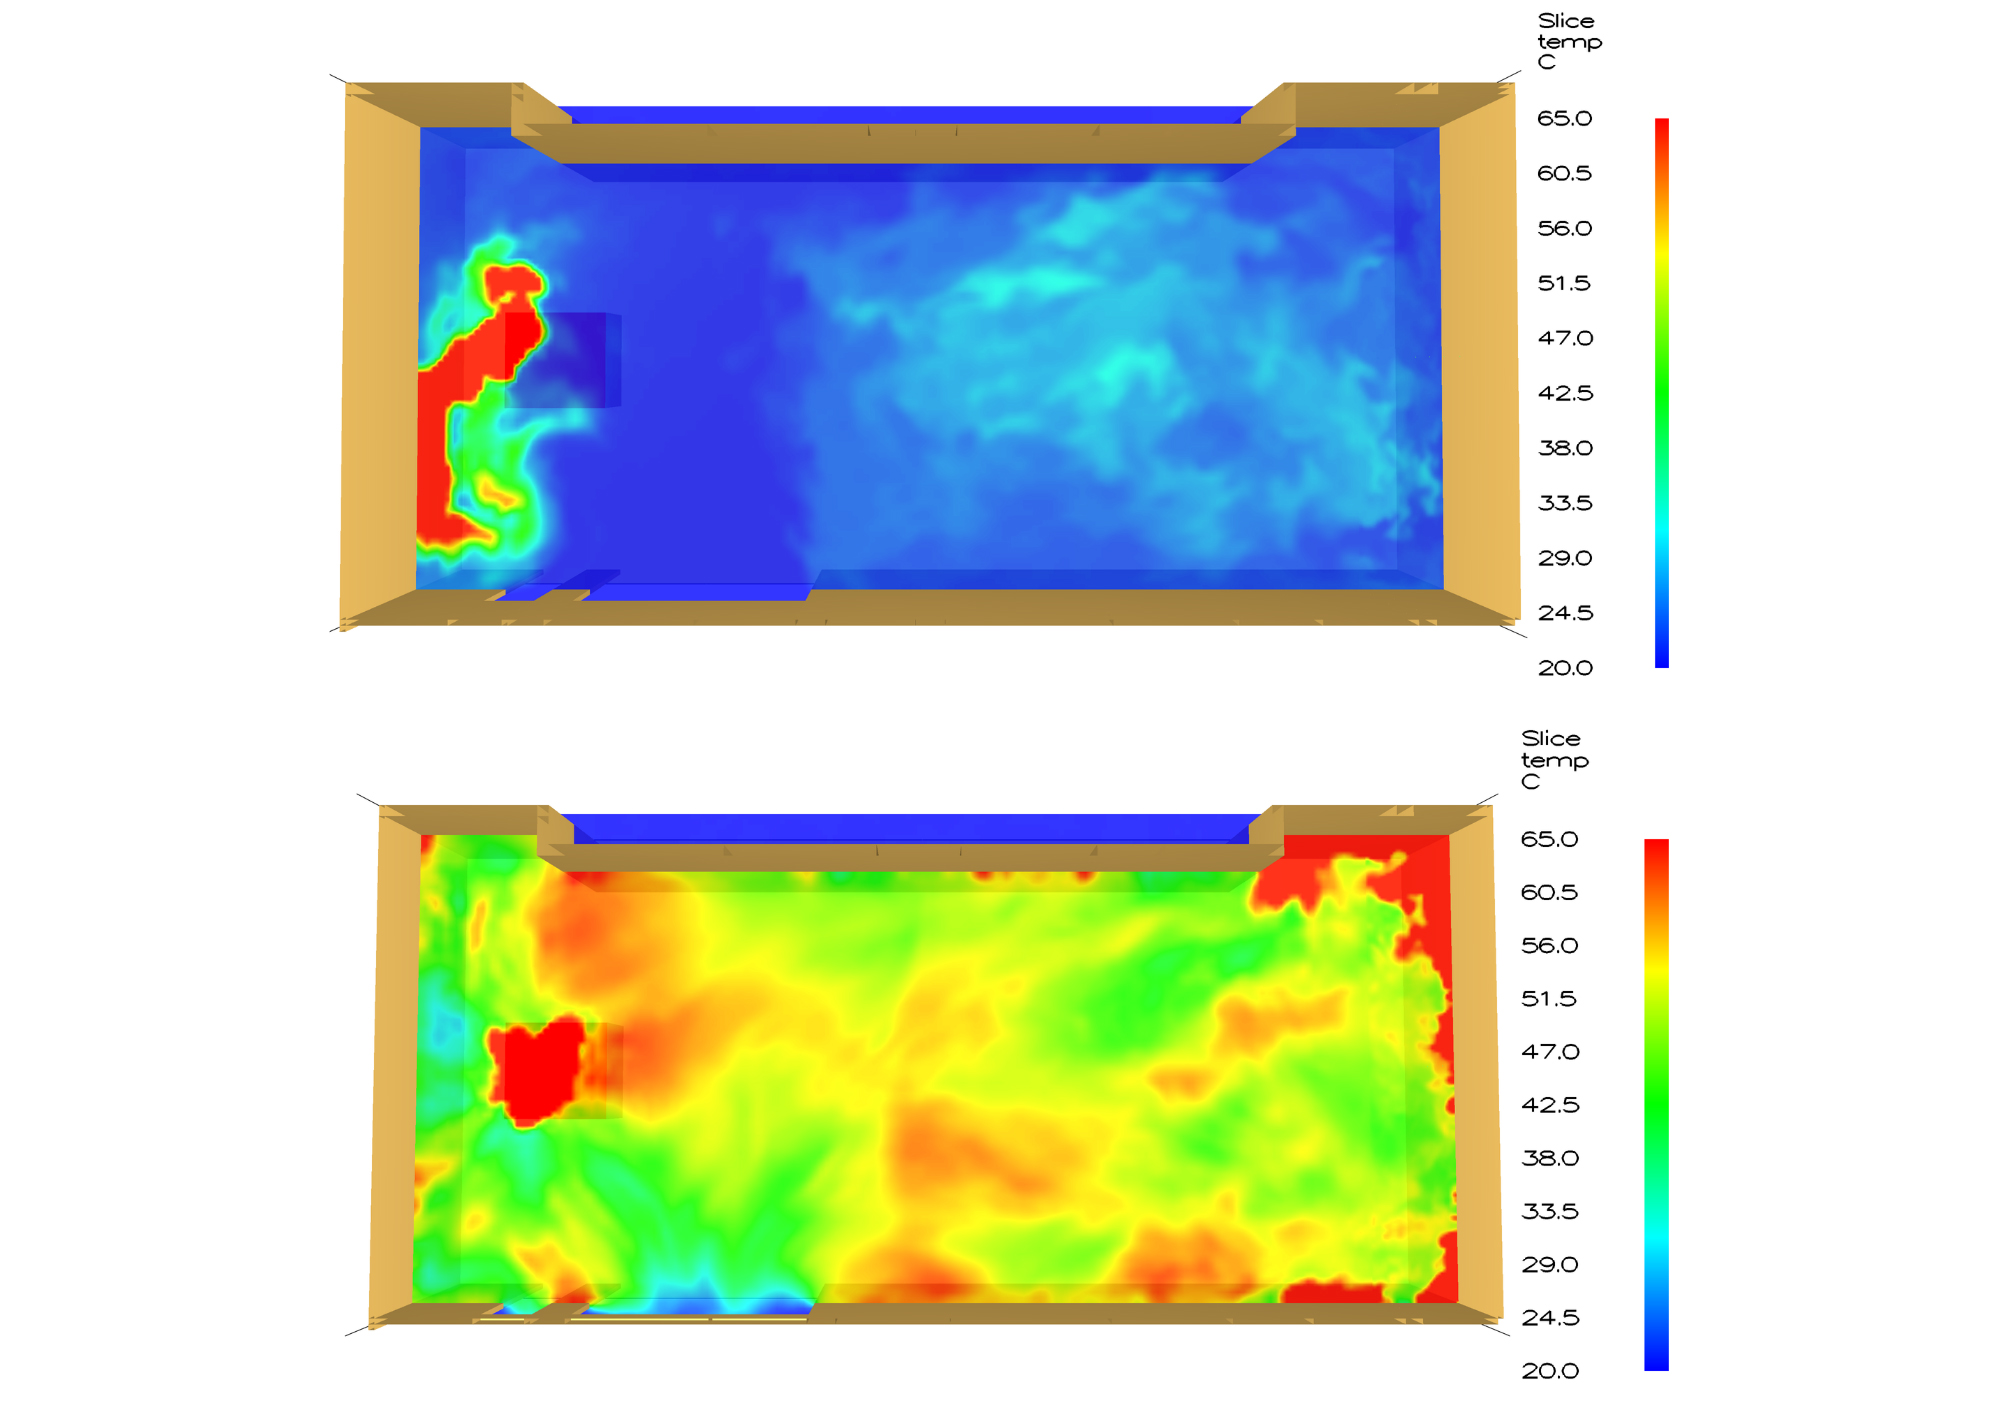 Modelling shows temperature at 16 minutes with a solar chimney (top) and at 3 minutes without a solar chimney (bottom).